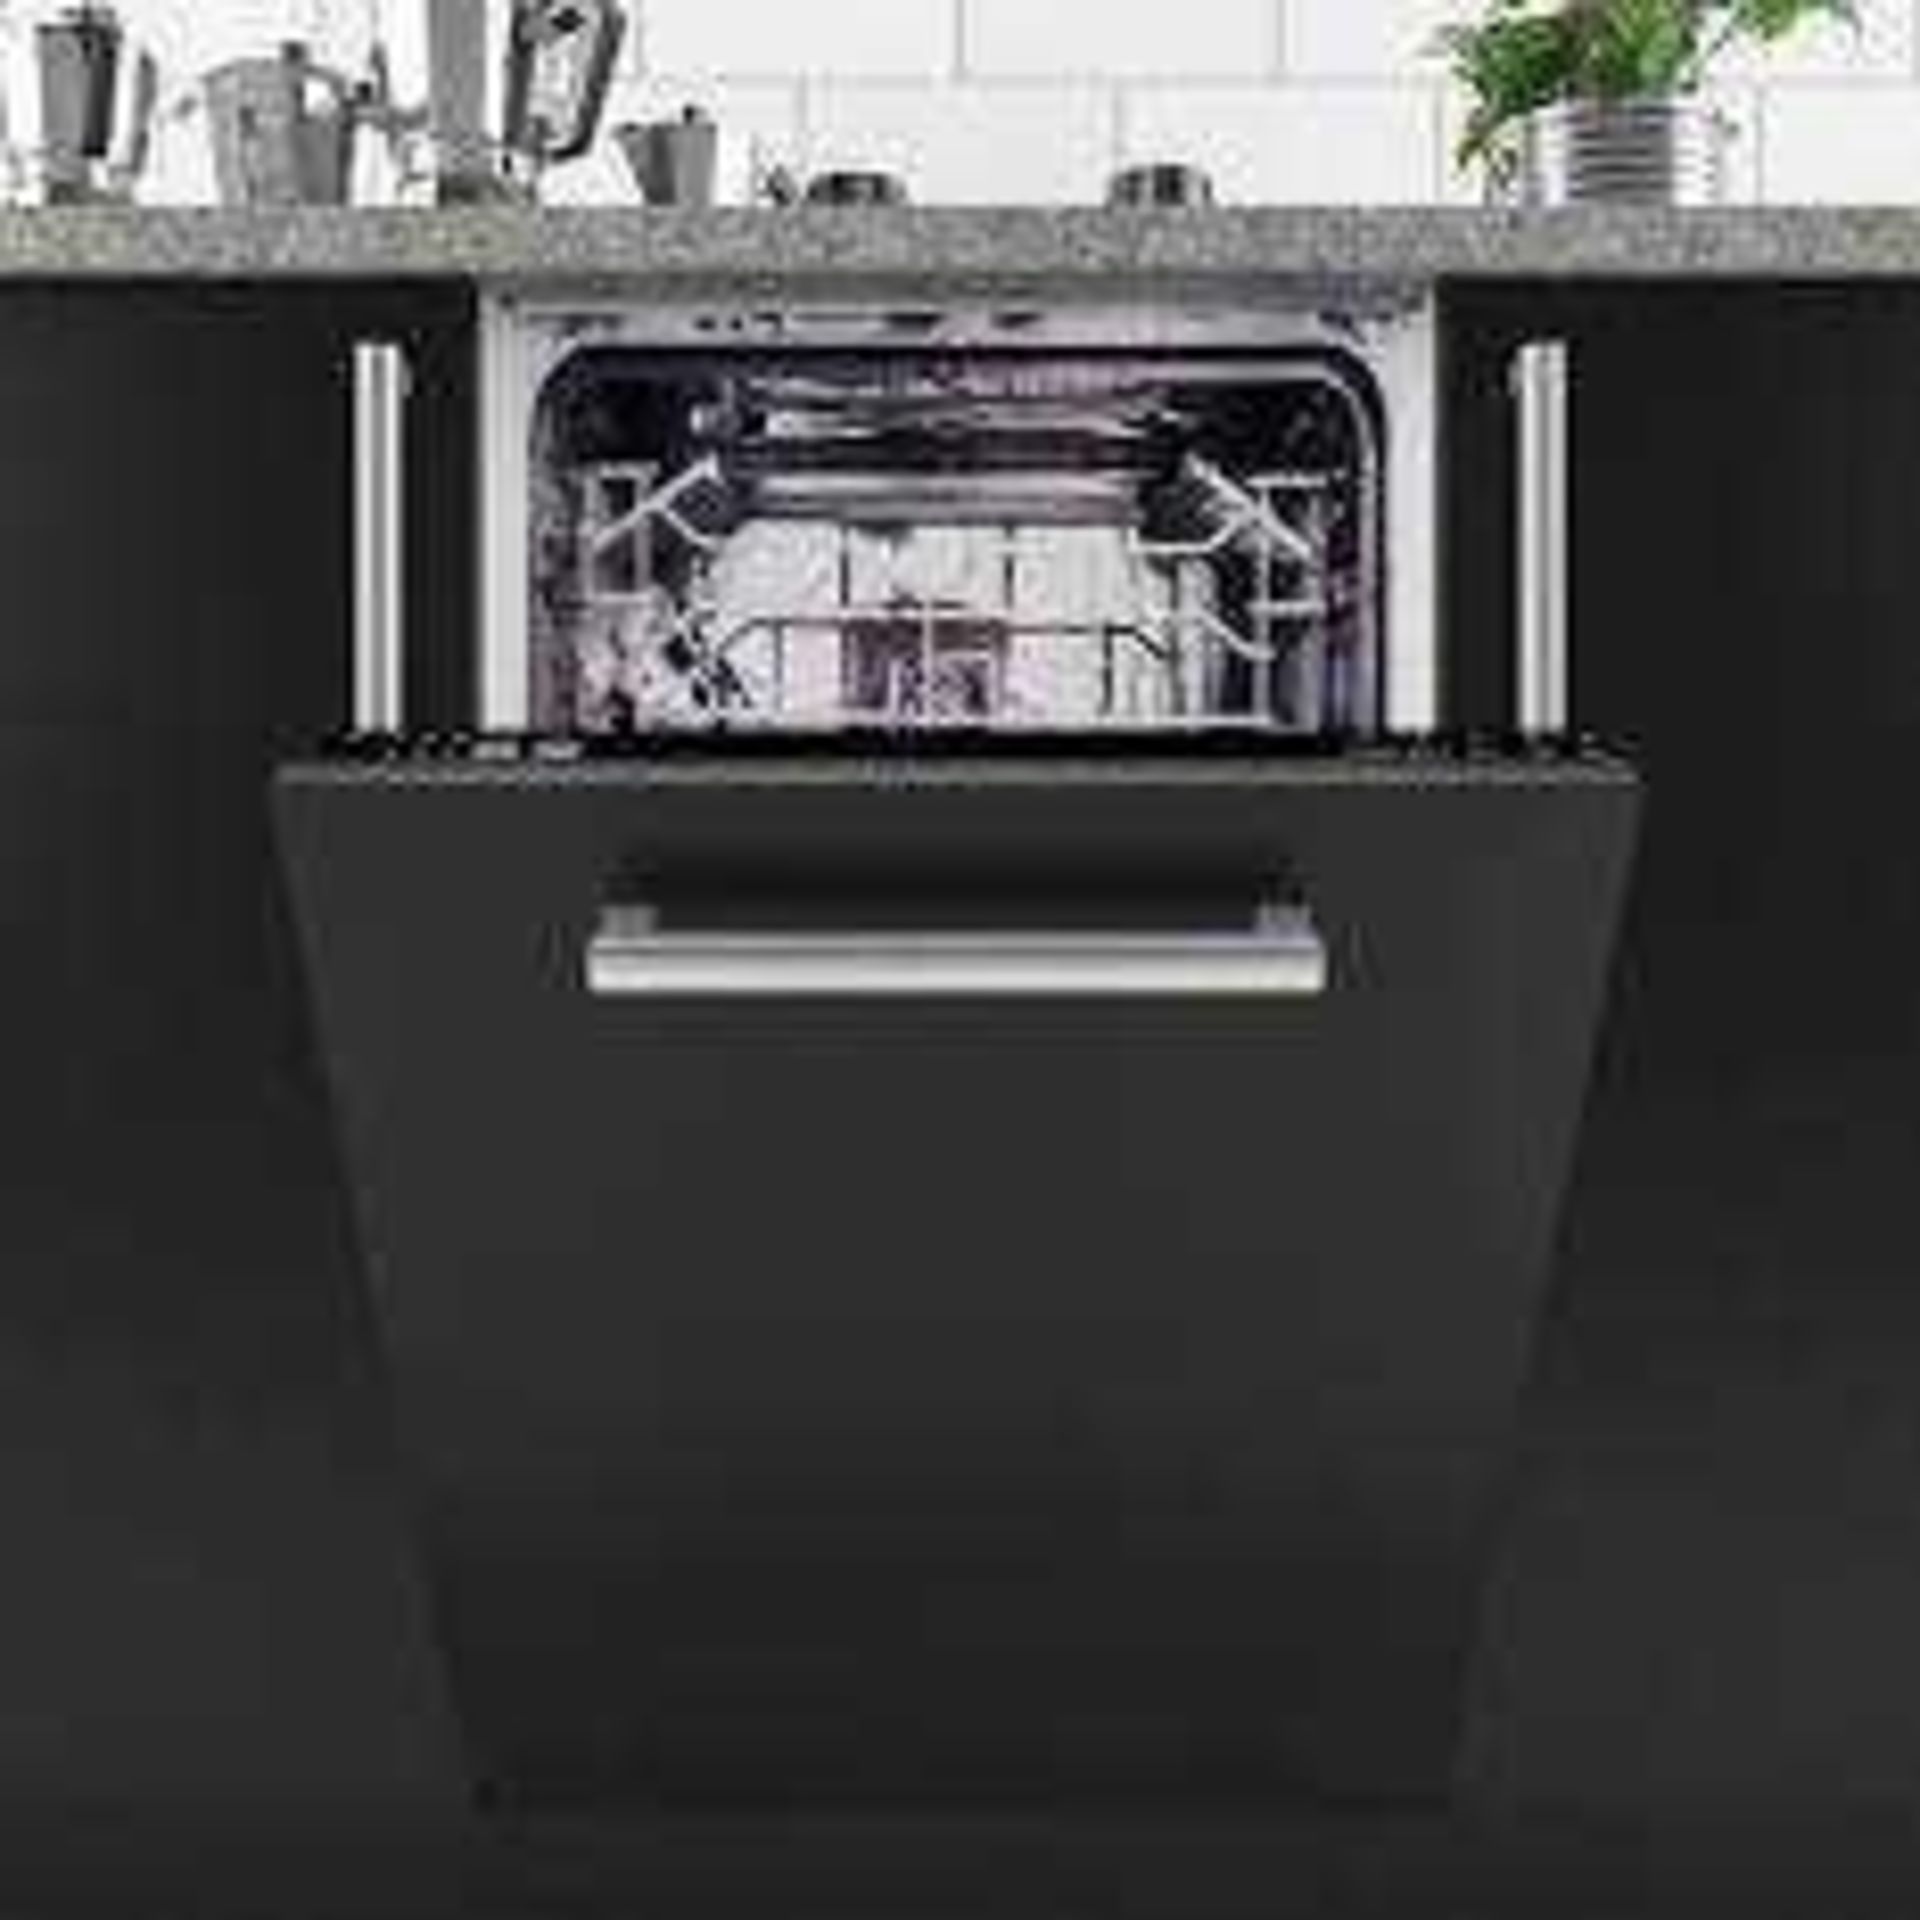 Rrp £350 Culina Ubmd45M Built In Fully Int. Slimline Dishwasher